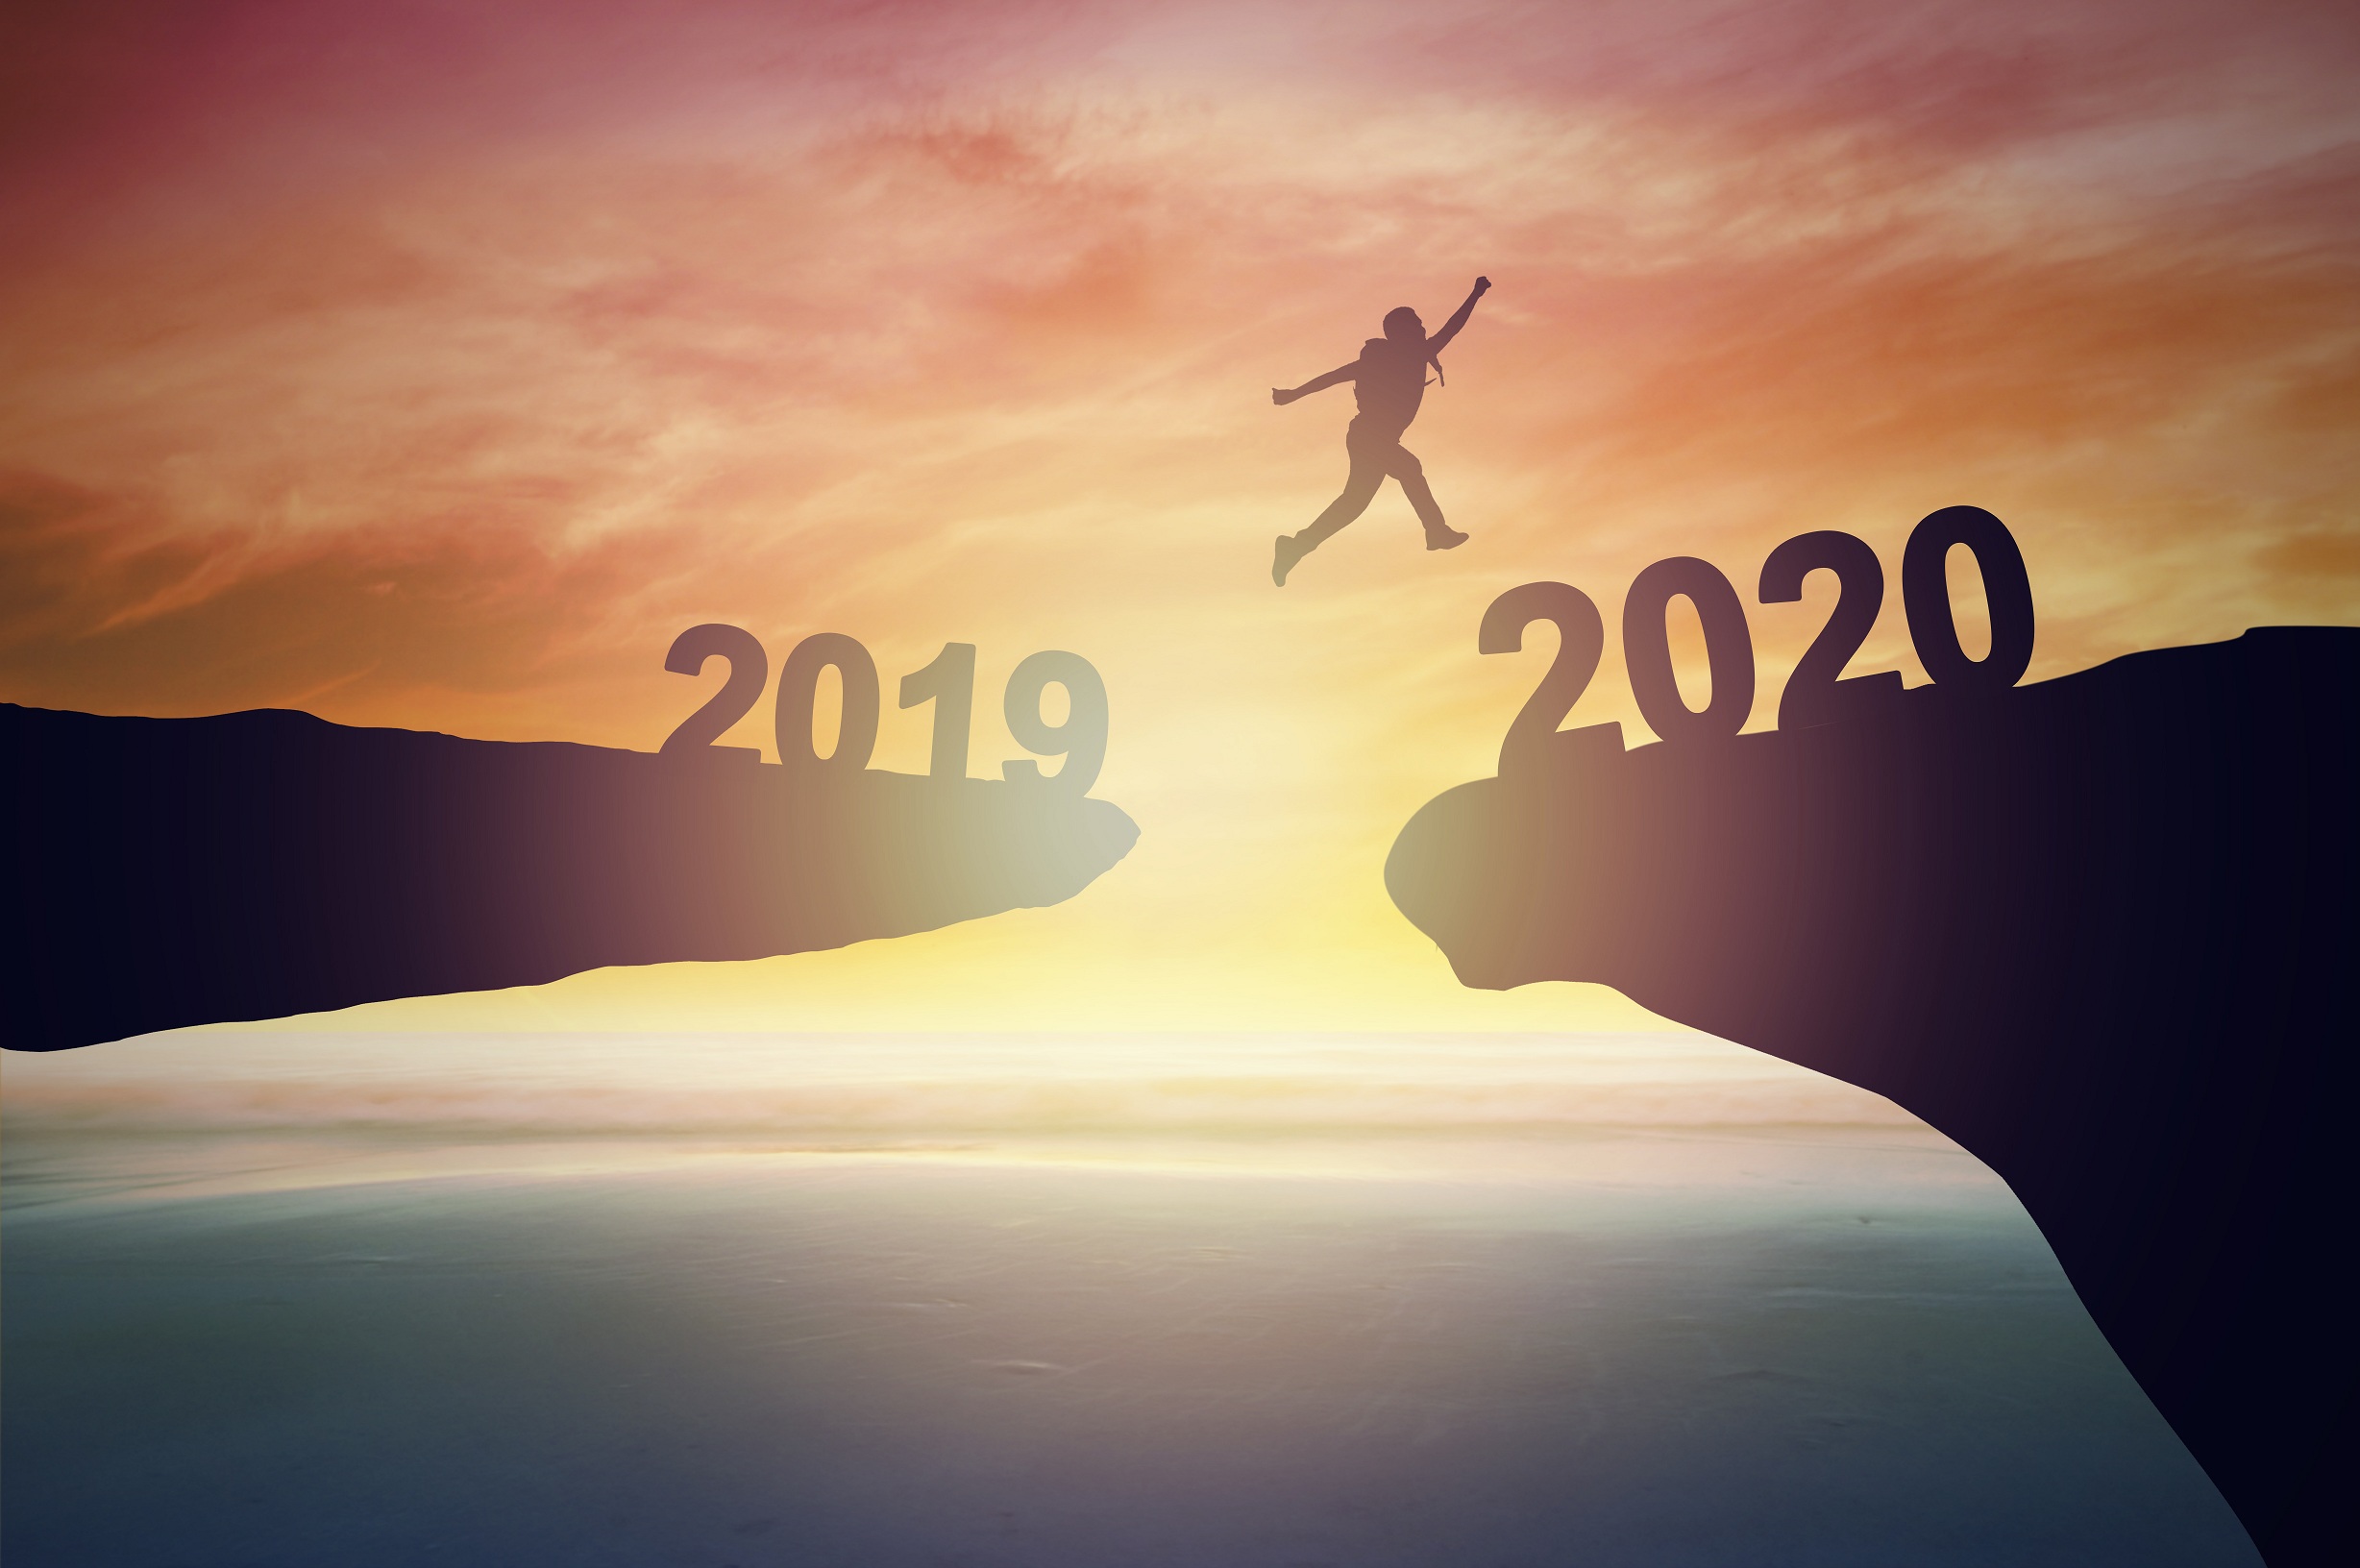 man jumping over barrier cliff and success from 2019 to 2020